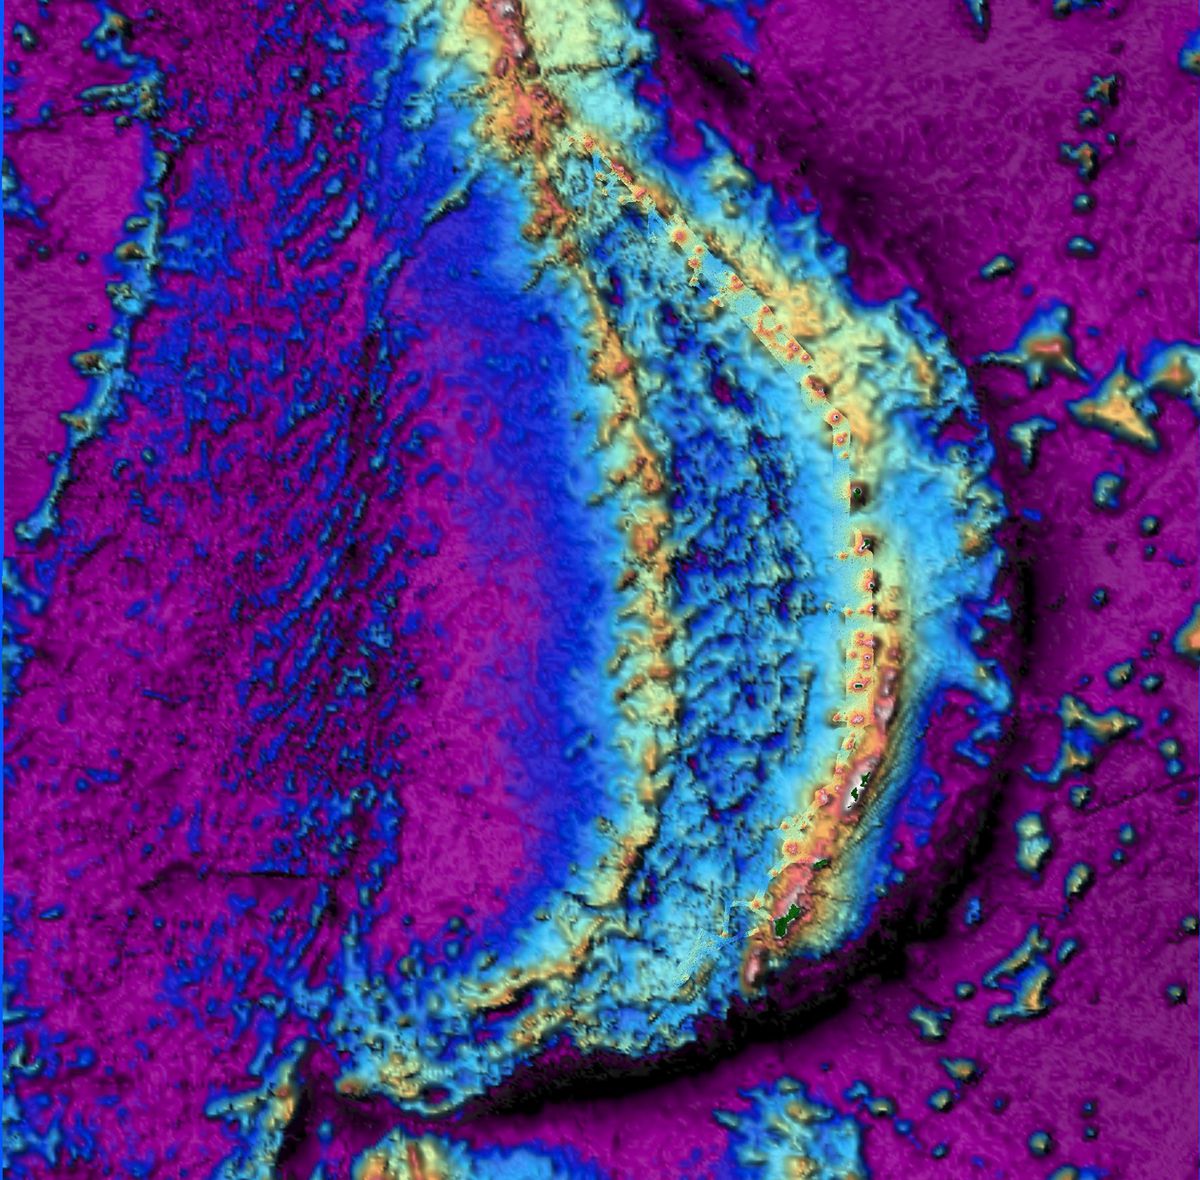 A topographic image of the seafloor showing a curved mountain range.